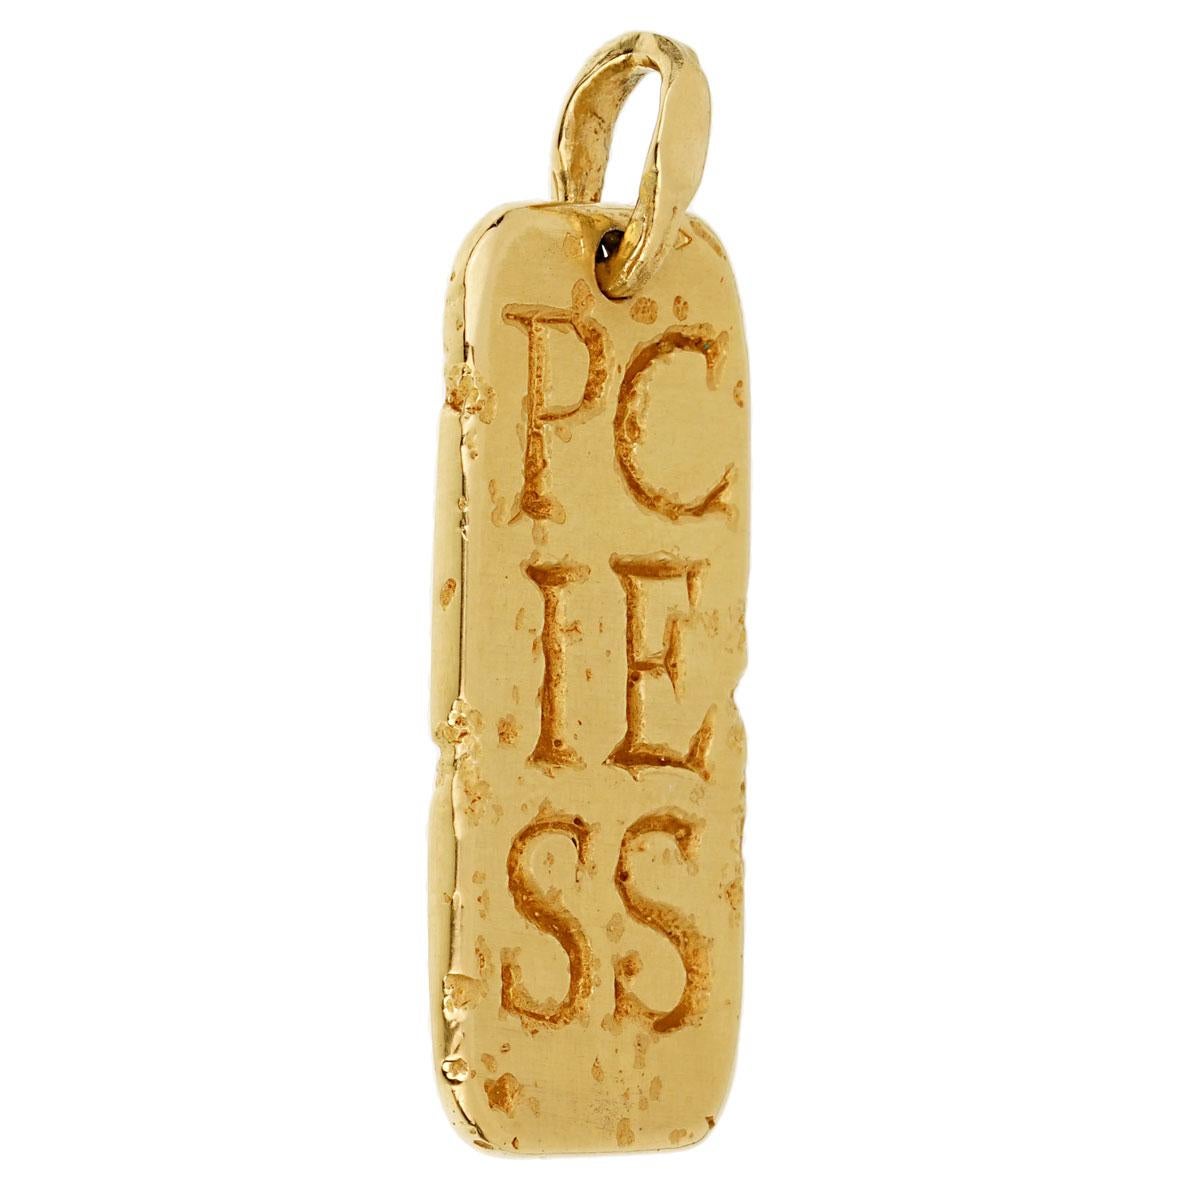 A magnificent and highly collectible Van Cleef & Arpels vintage Pisces pendant necklace circa 1980s crafted in 18k yellow gold.